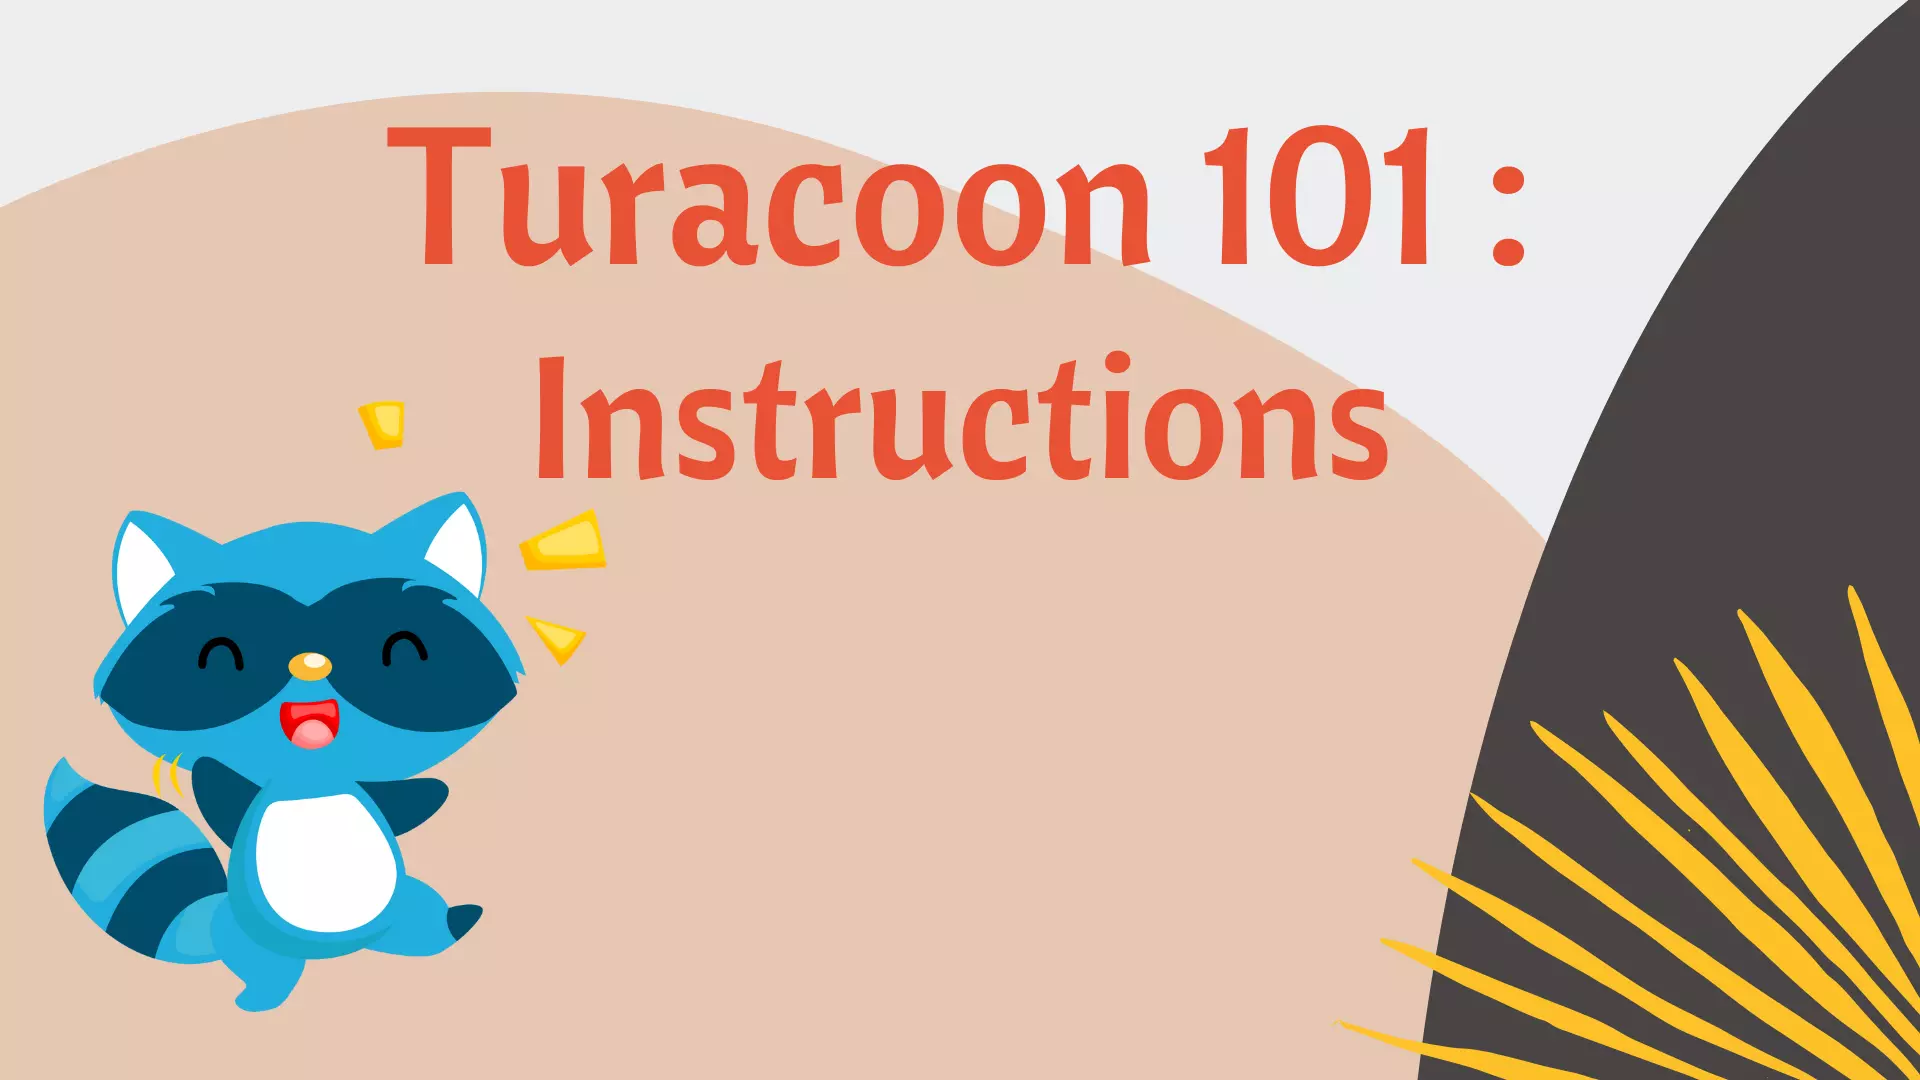 Turacoon 101: Instructions